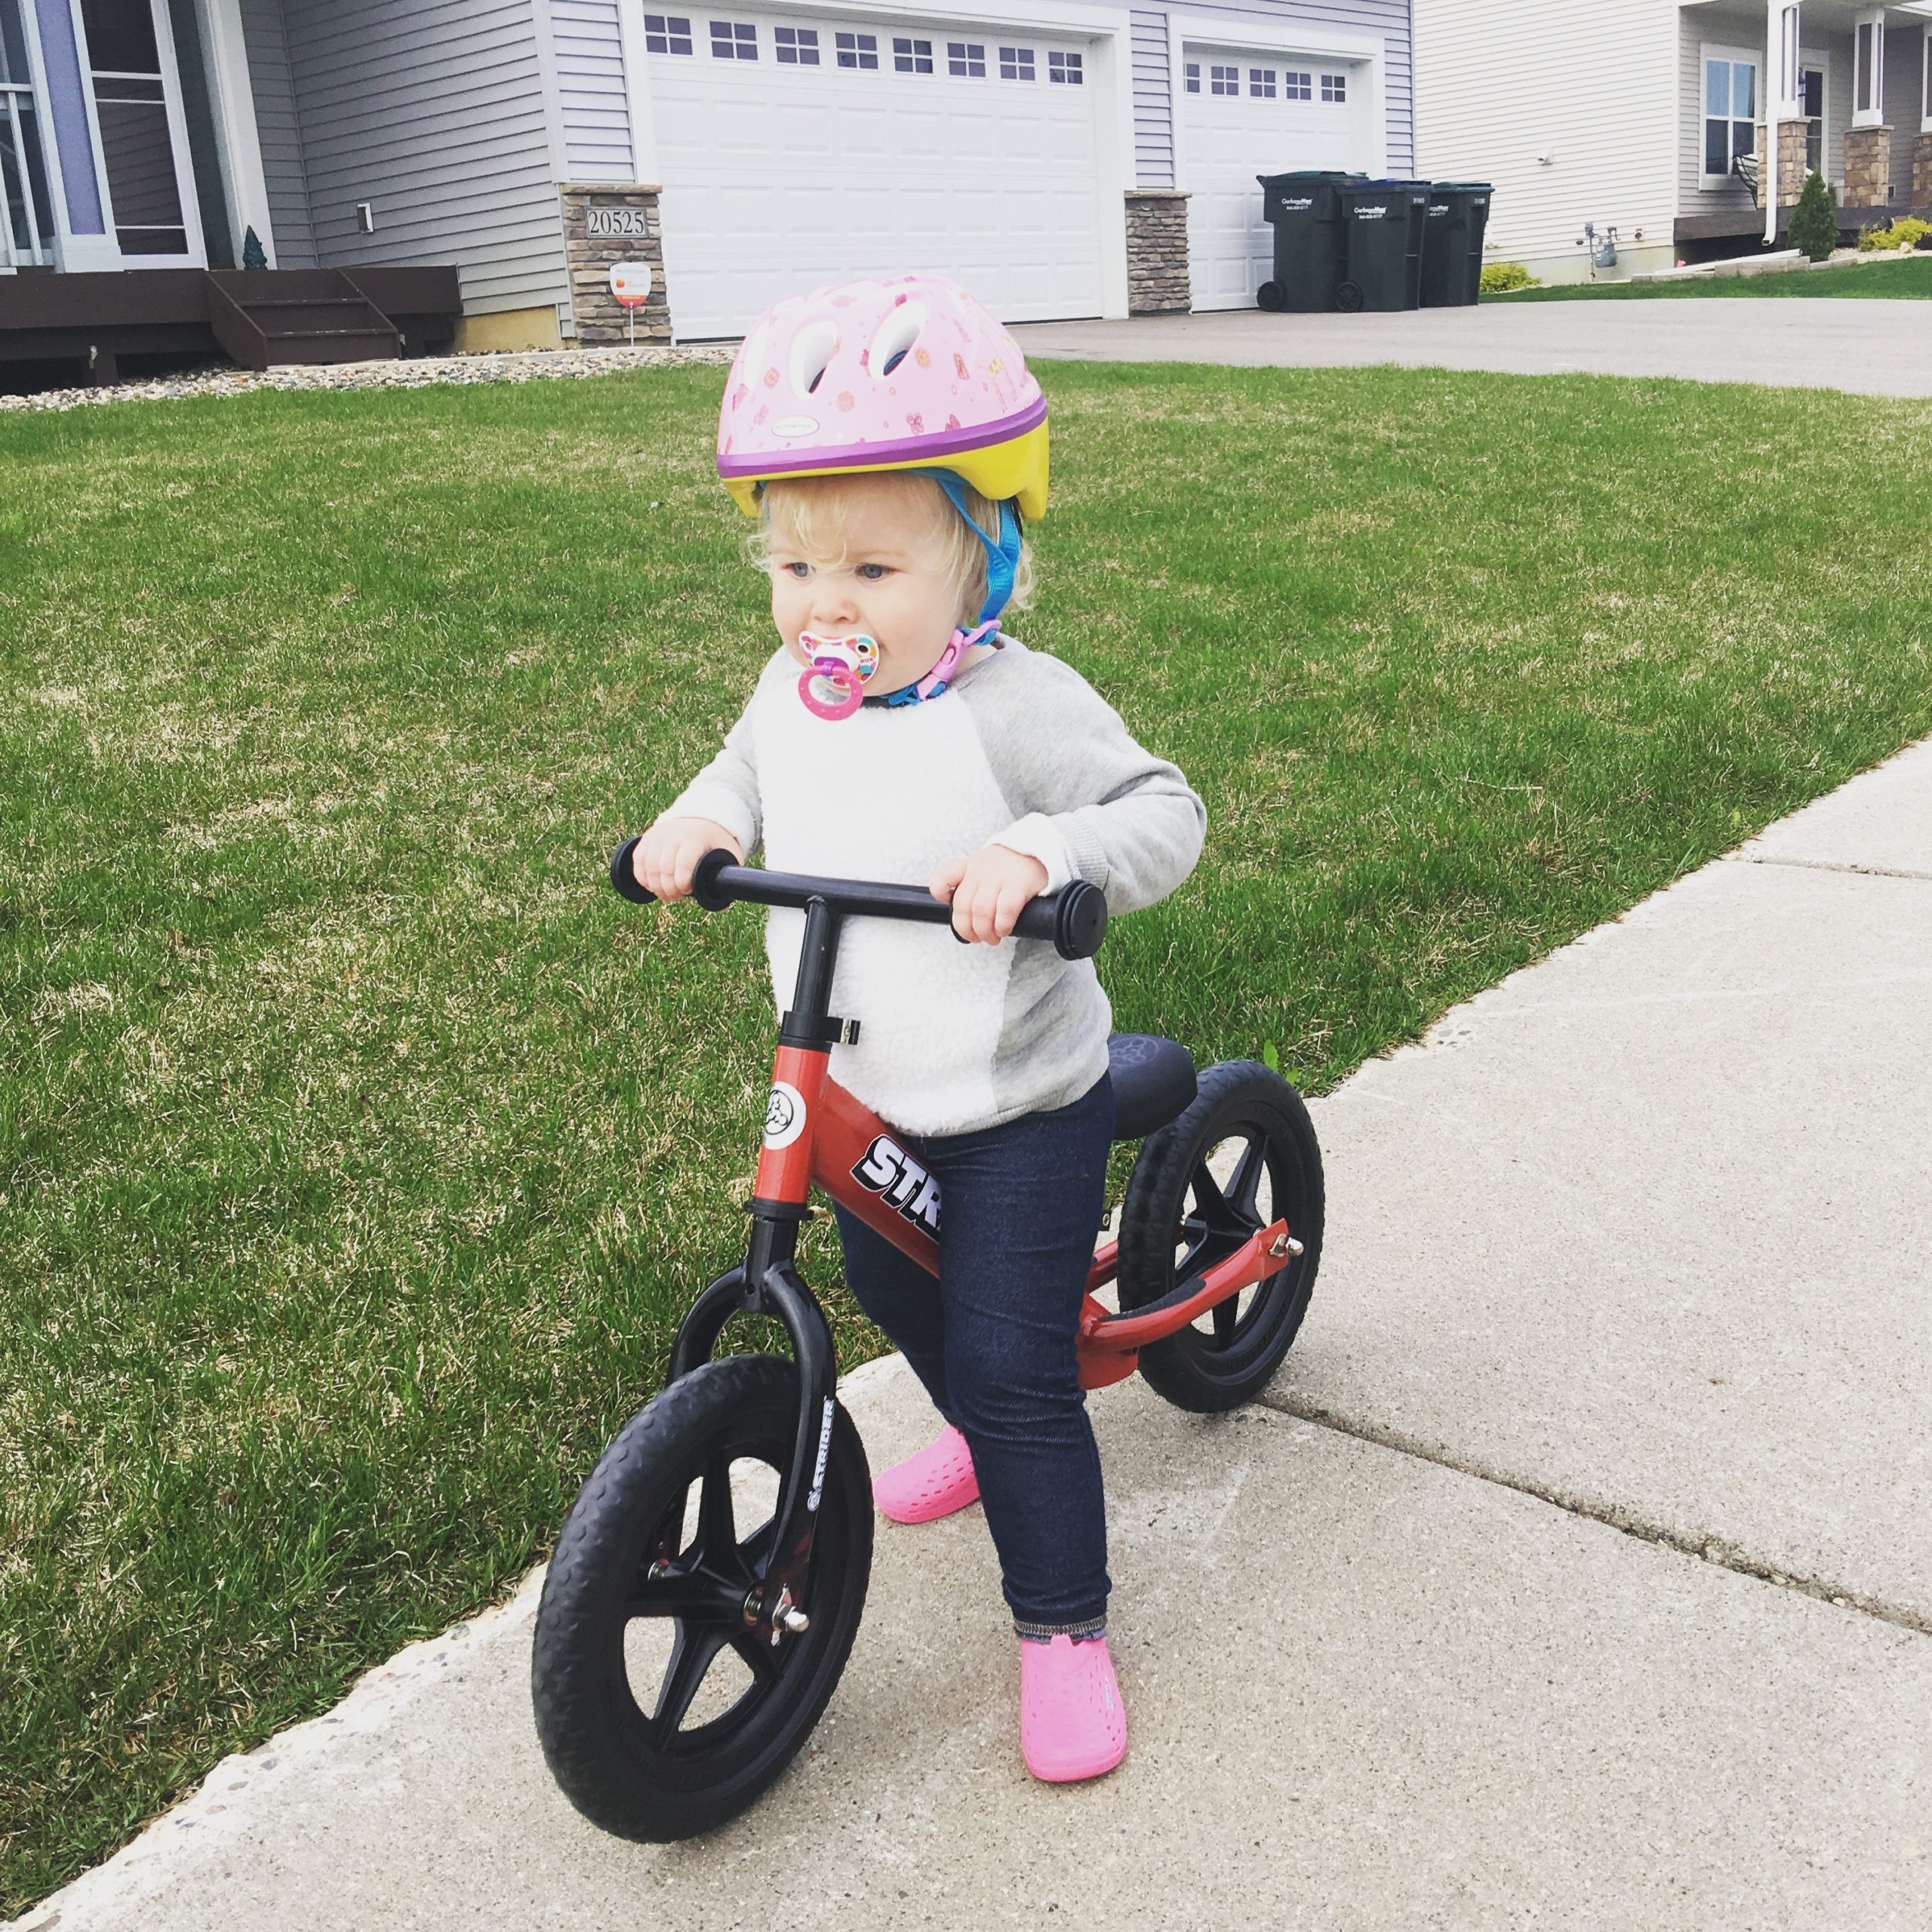 Strider 12 Classic No-Pedal Balance Bike for sale online 